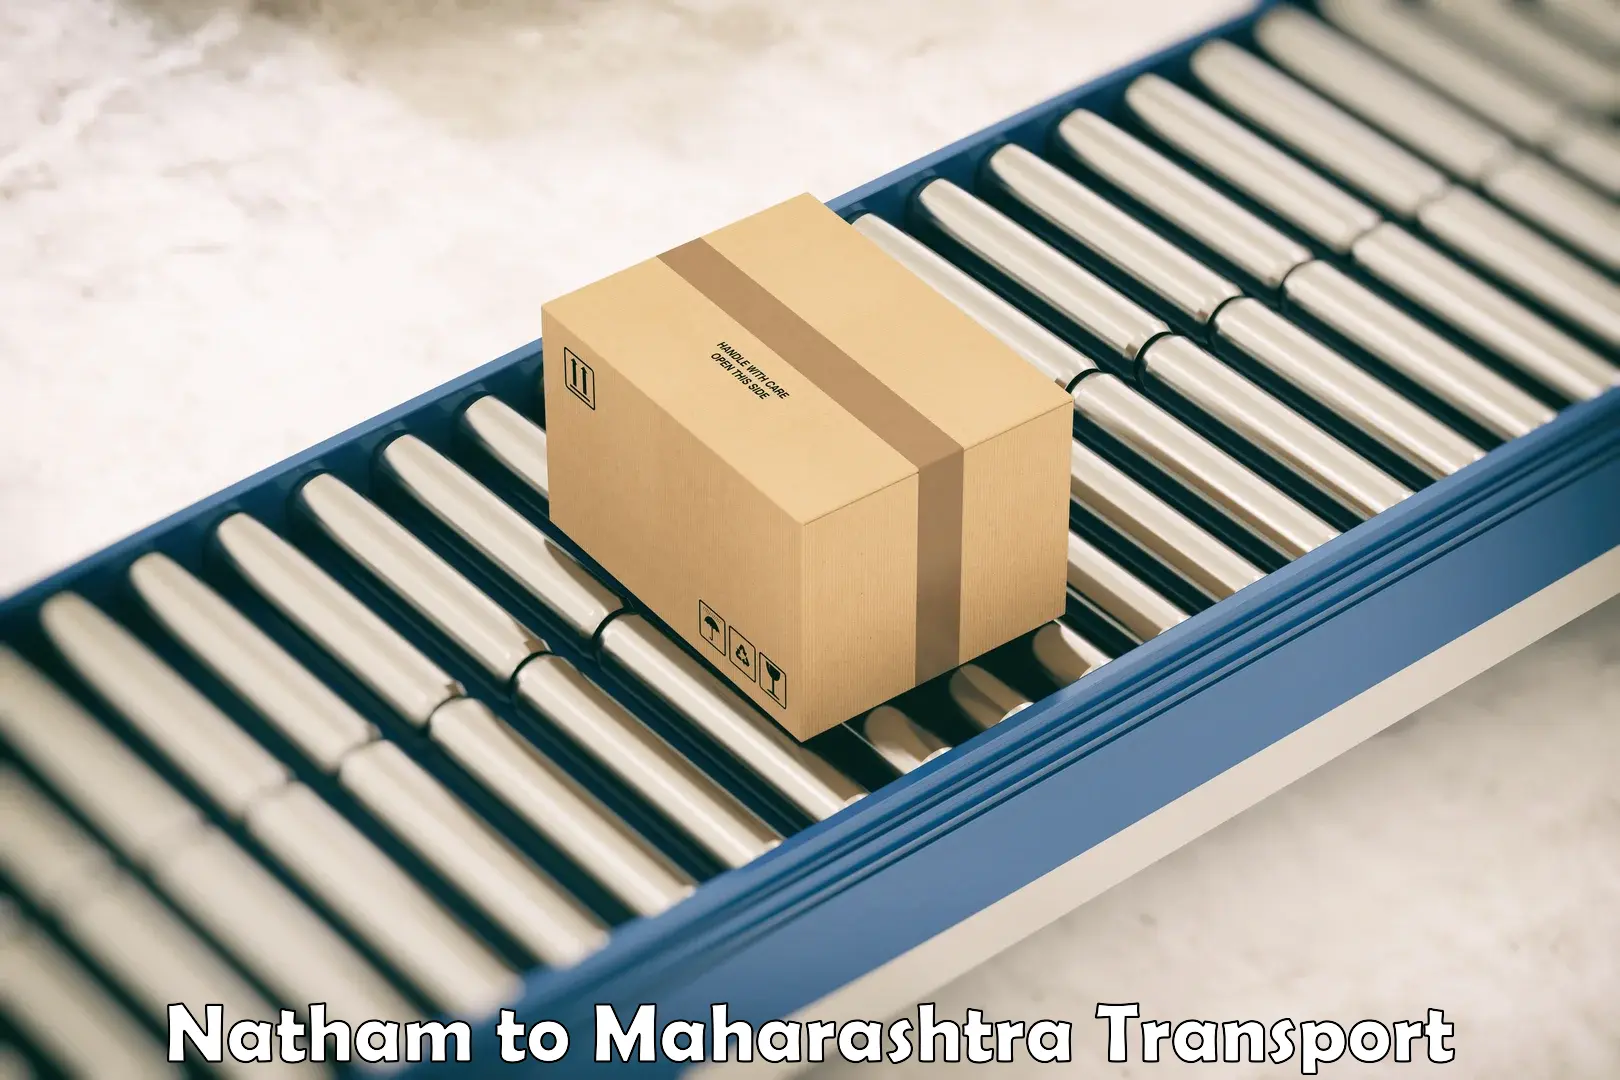 Truck transport companies in India in Natham to Symbiosis International Pune